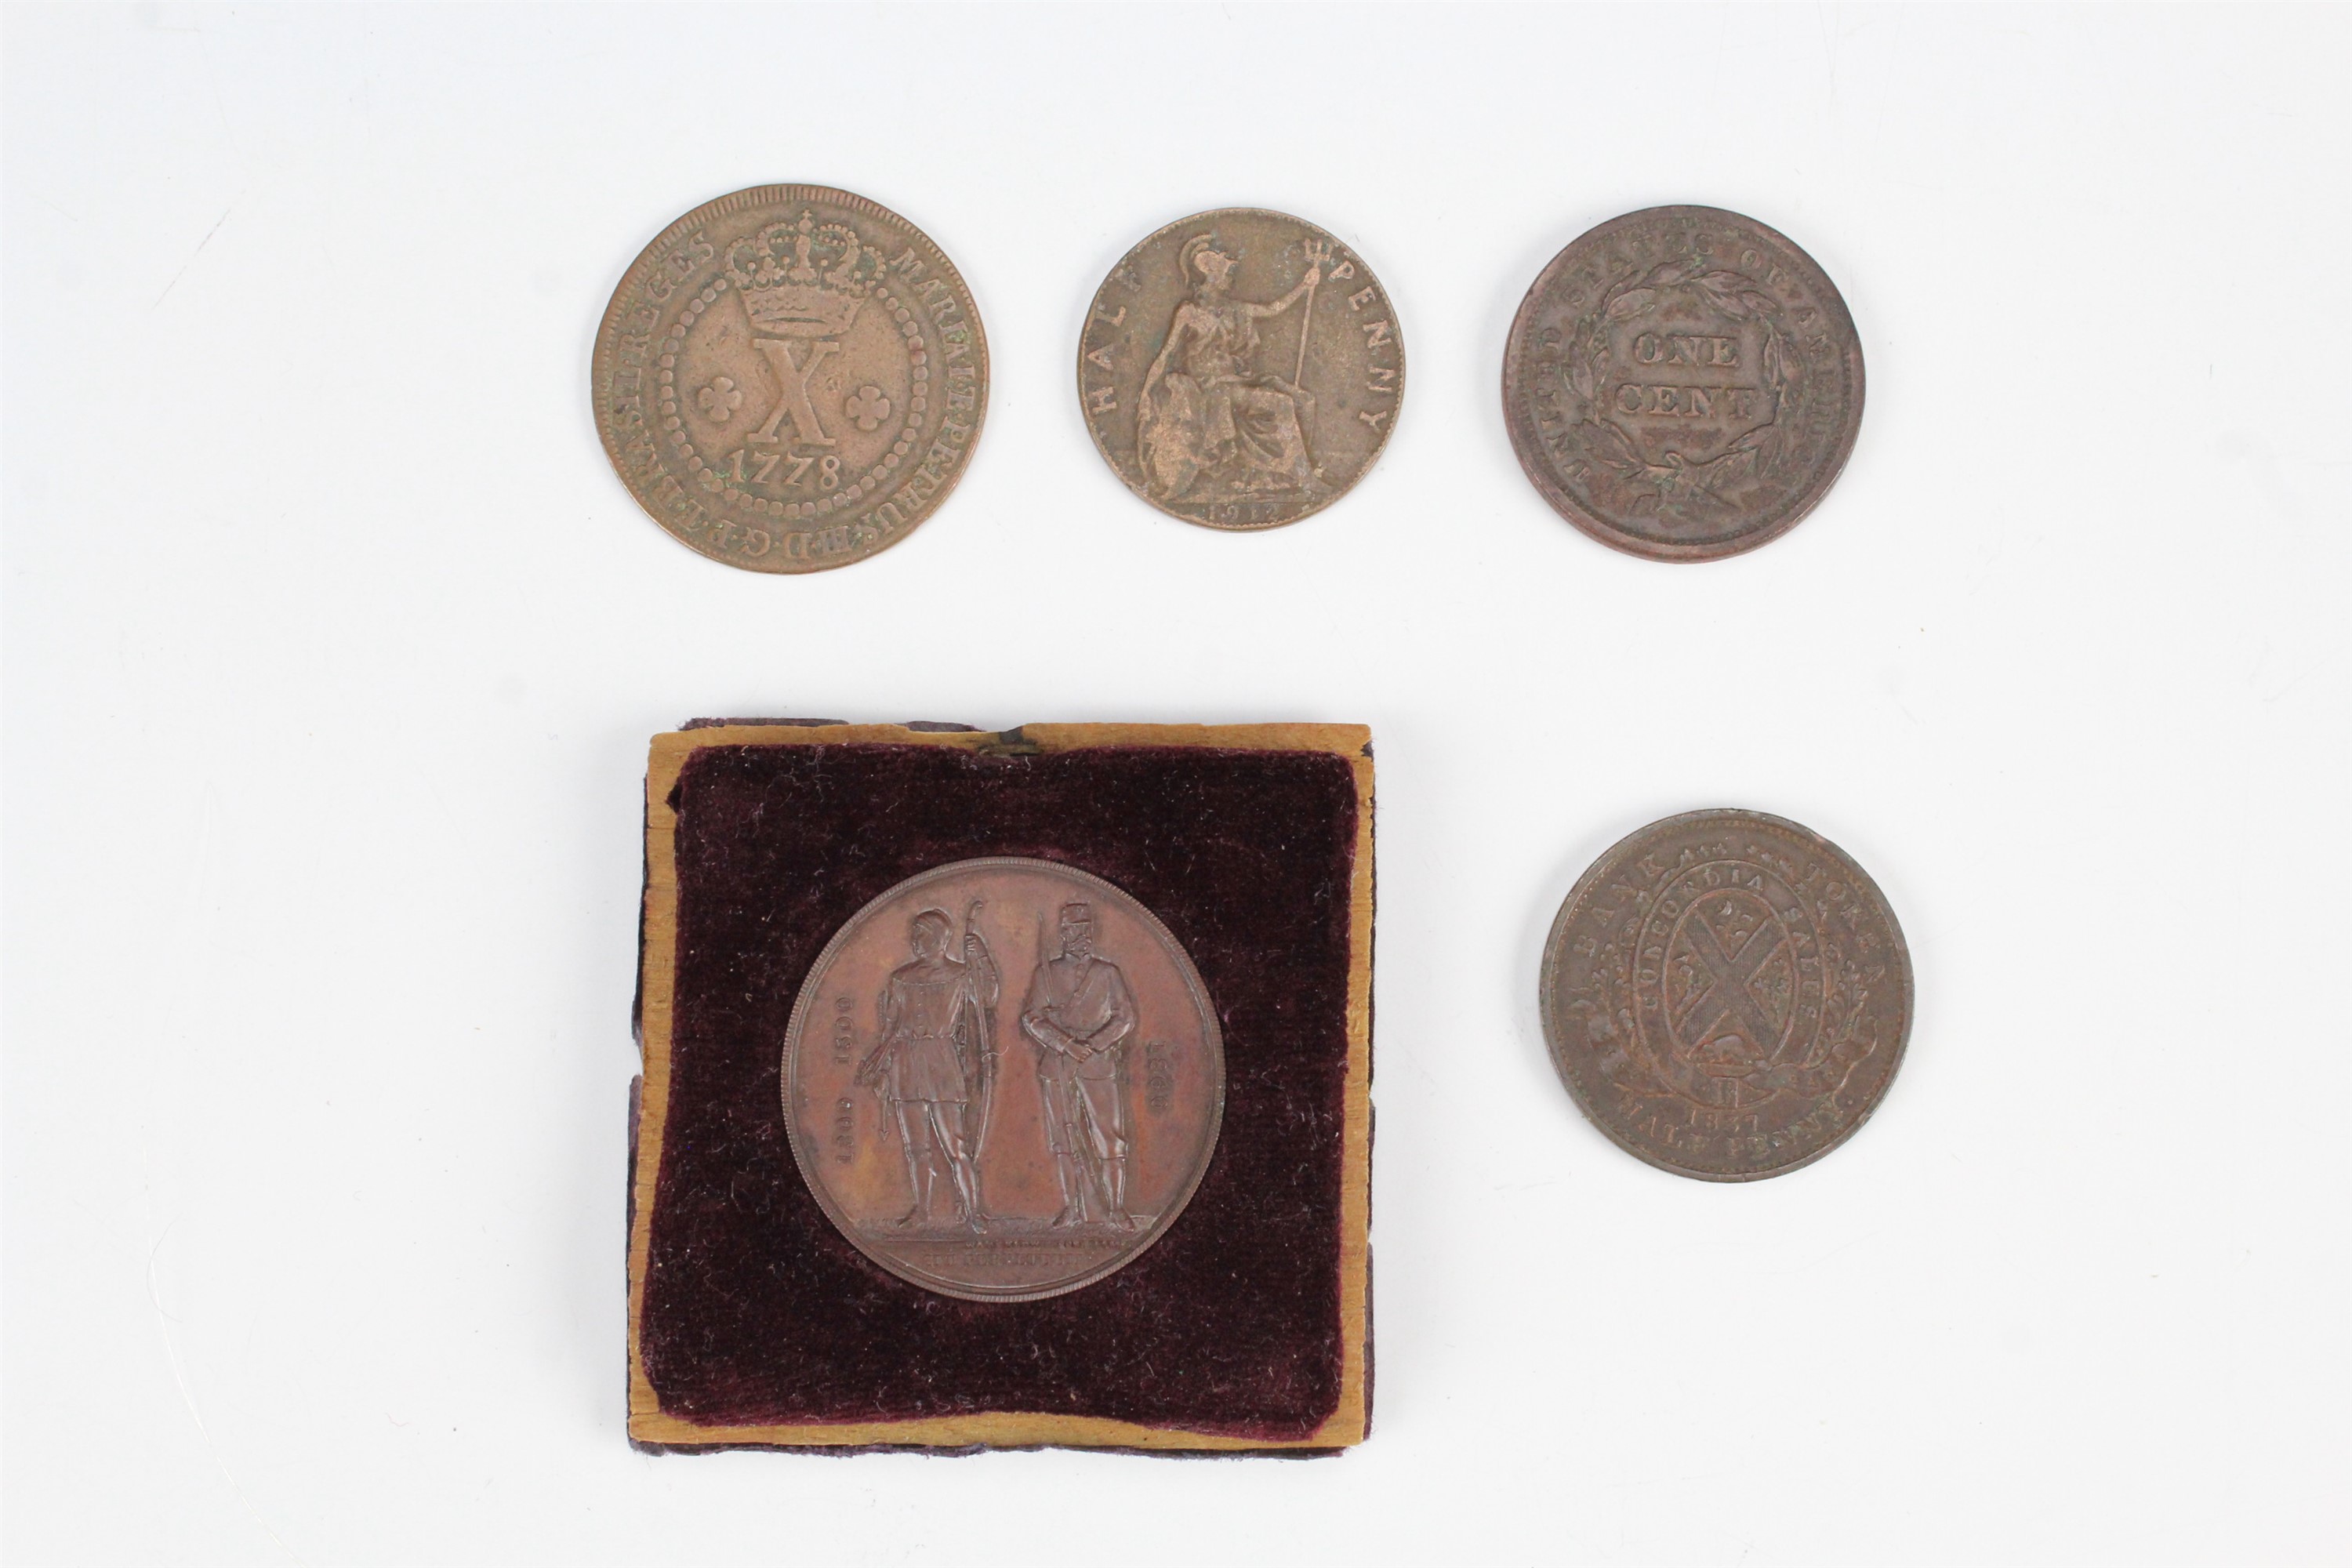 A group of coins, comprising a 1778 low crown 10 Reis, an 1842 "Liberty Head" Cent, and a 1912 first